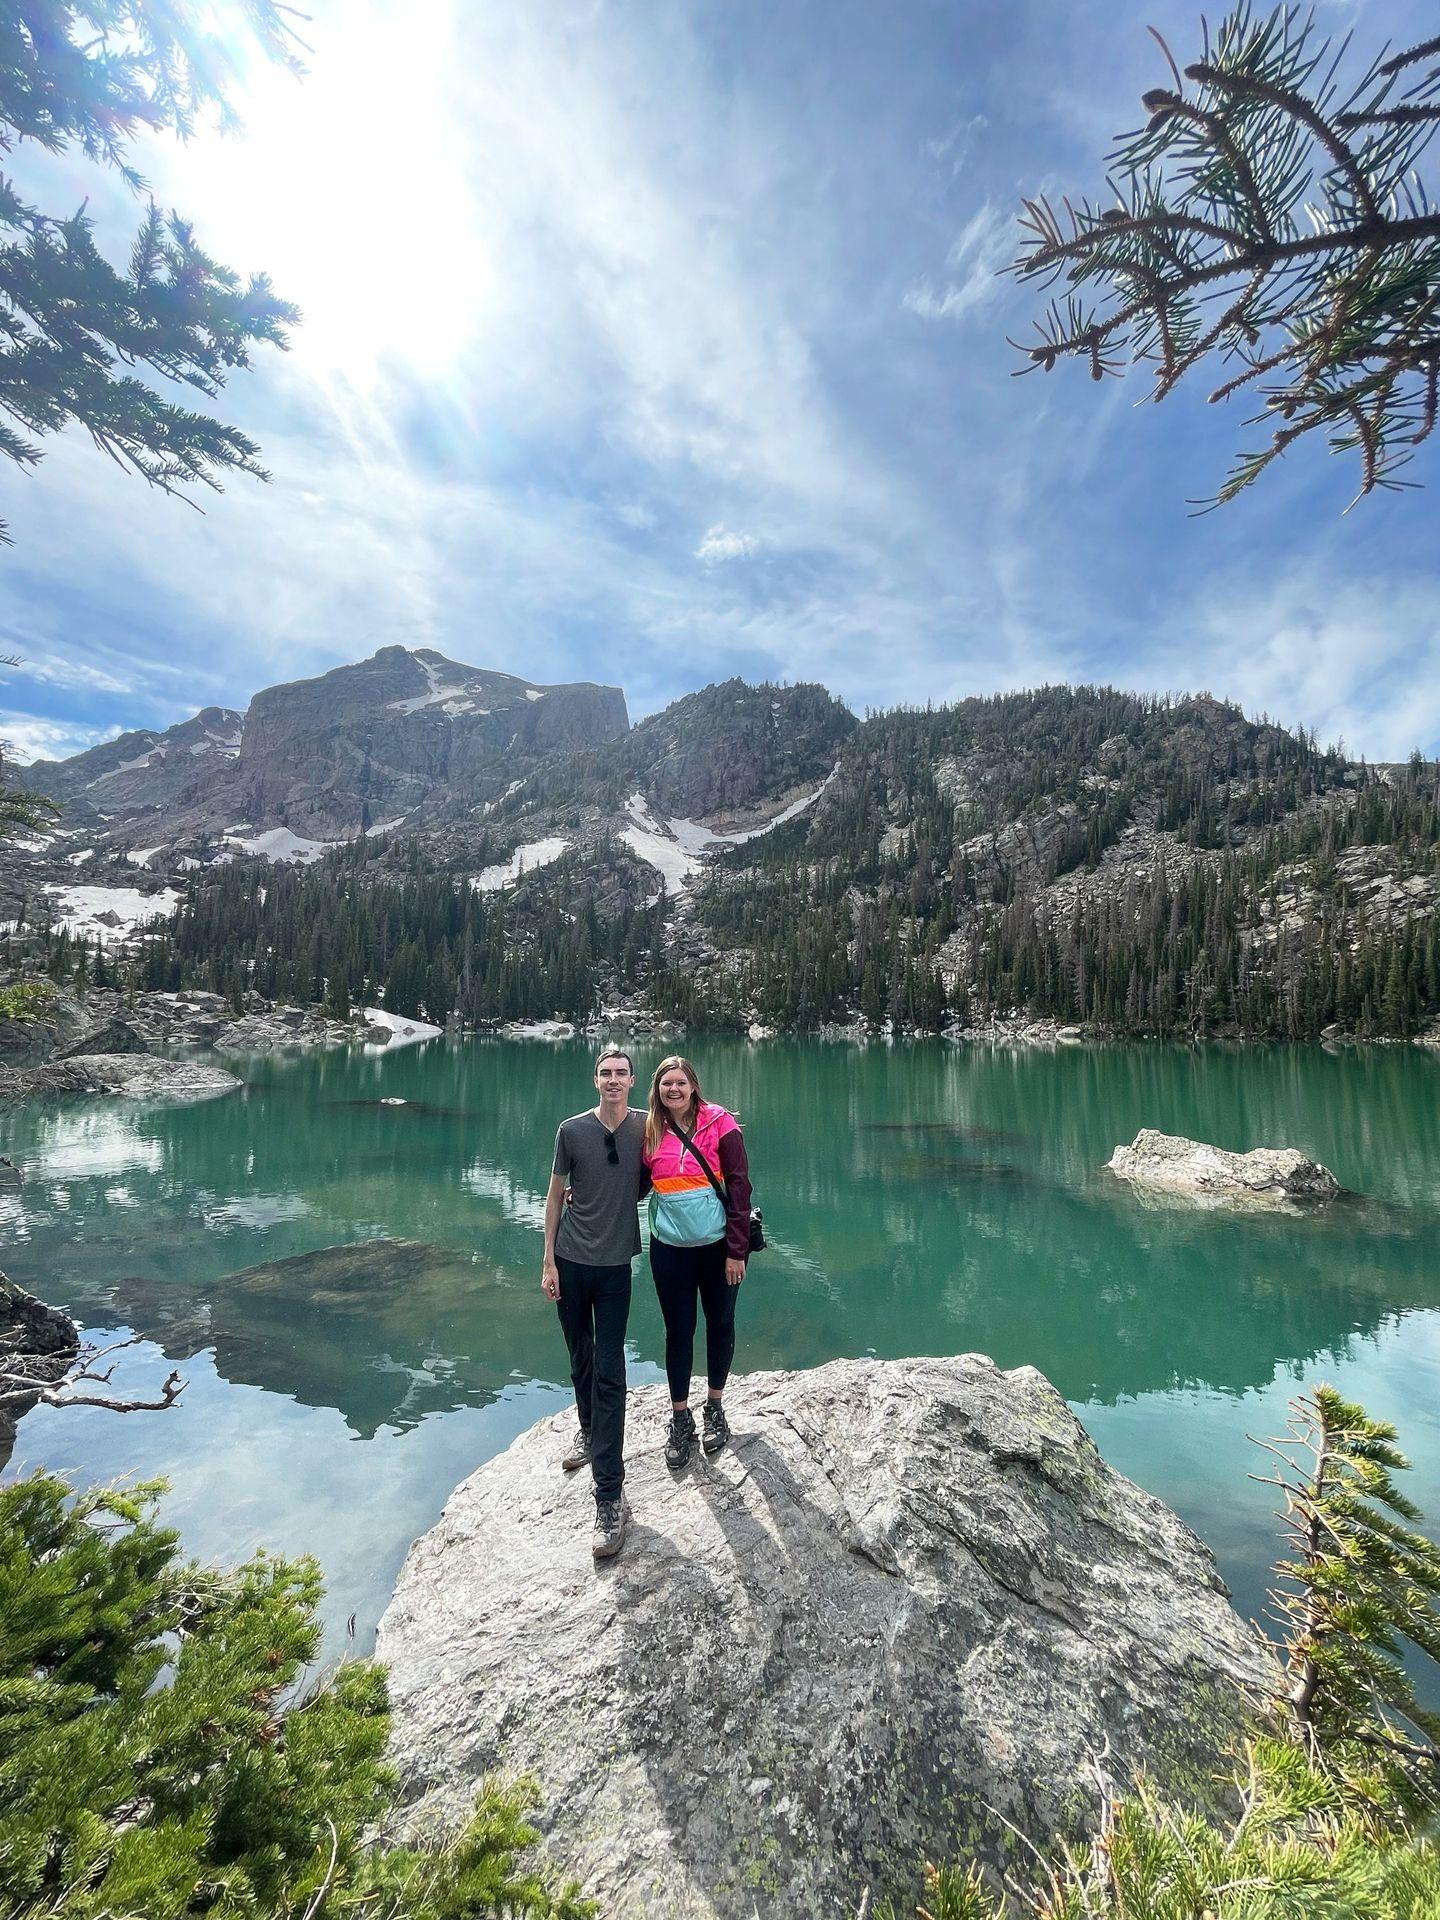 Lydia and Joe standing in front of the aqua, blue water of Lake Haiyaha in Rocky Mountain National Park.